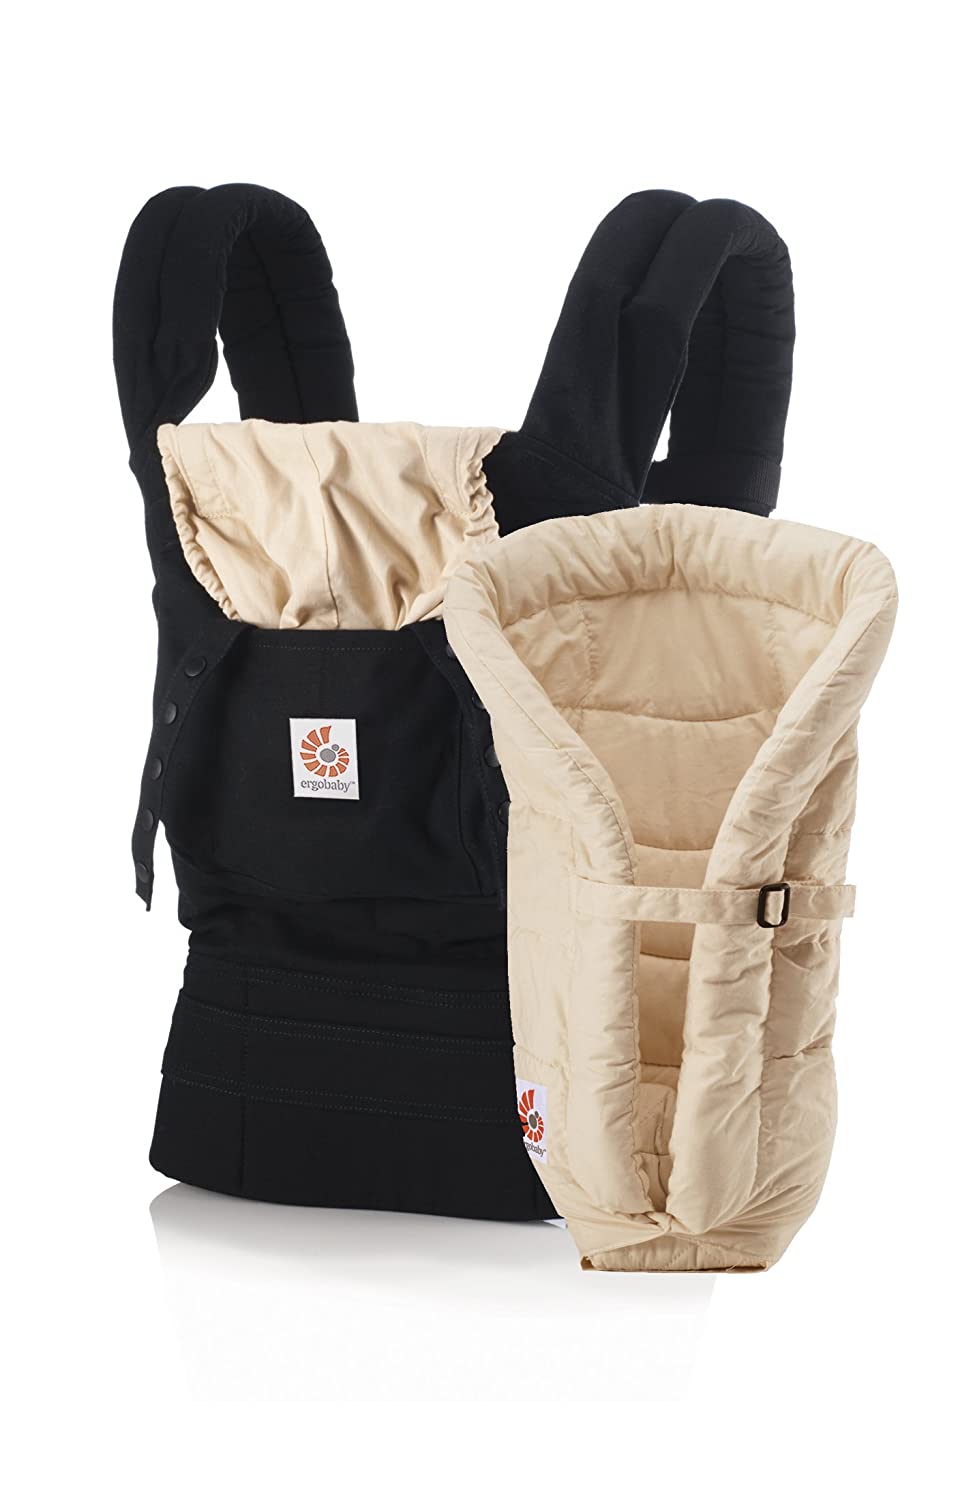 ERGObaby Original Baby Carrier – 2012 Collection – From Birth of 20 Pack (3.2 kg)